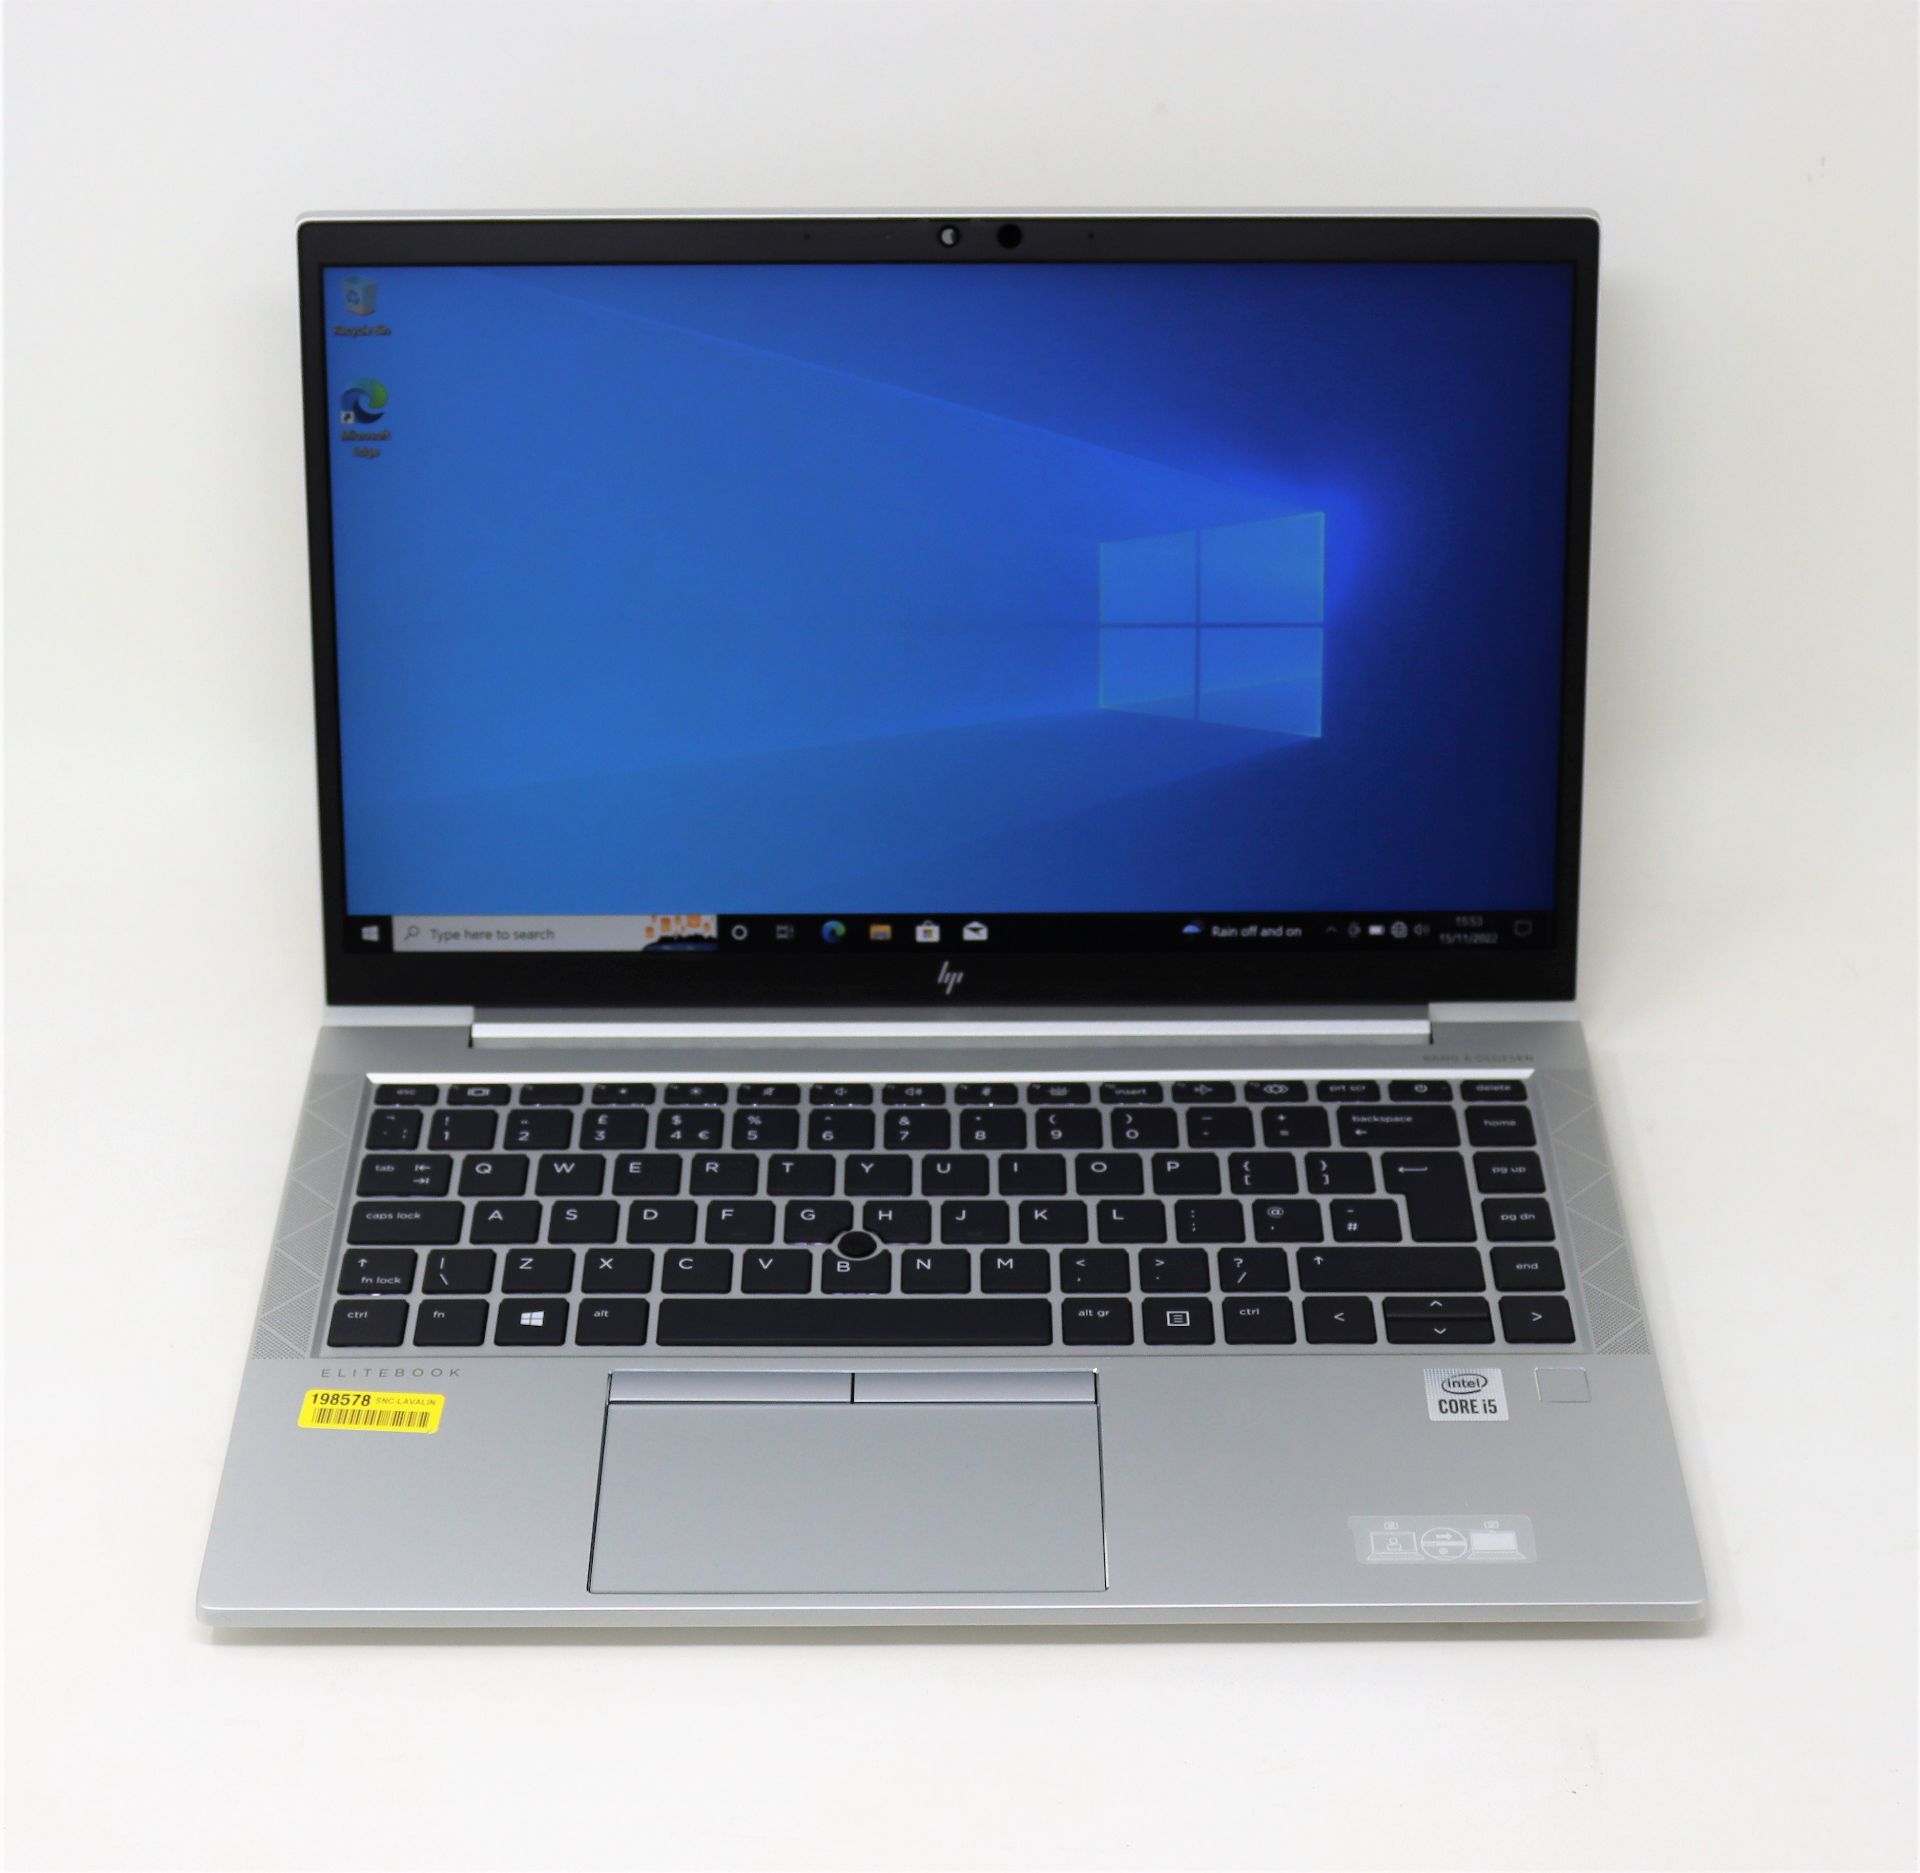 BIOS LOCKED - SOLD FOR PARTS - A preowned HP EliteBook 840 G7 notebook PC with Intel Core i5-10210U